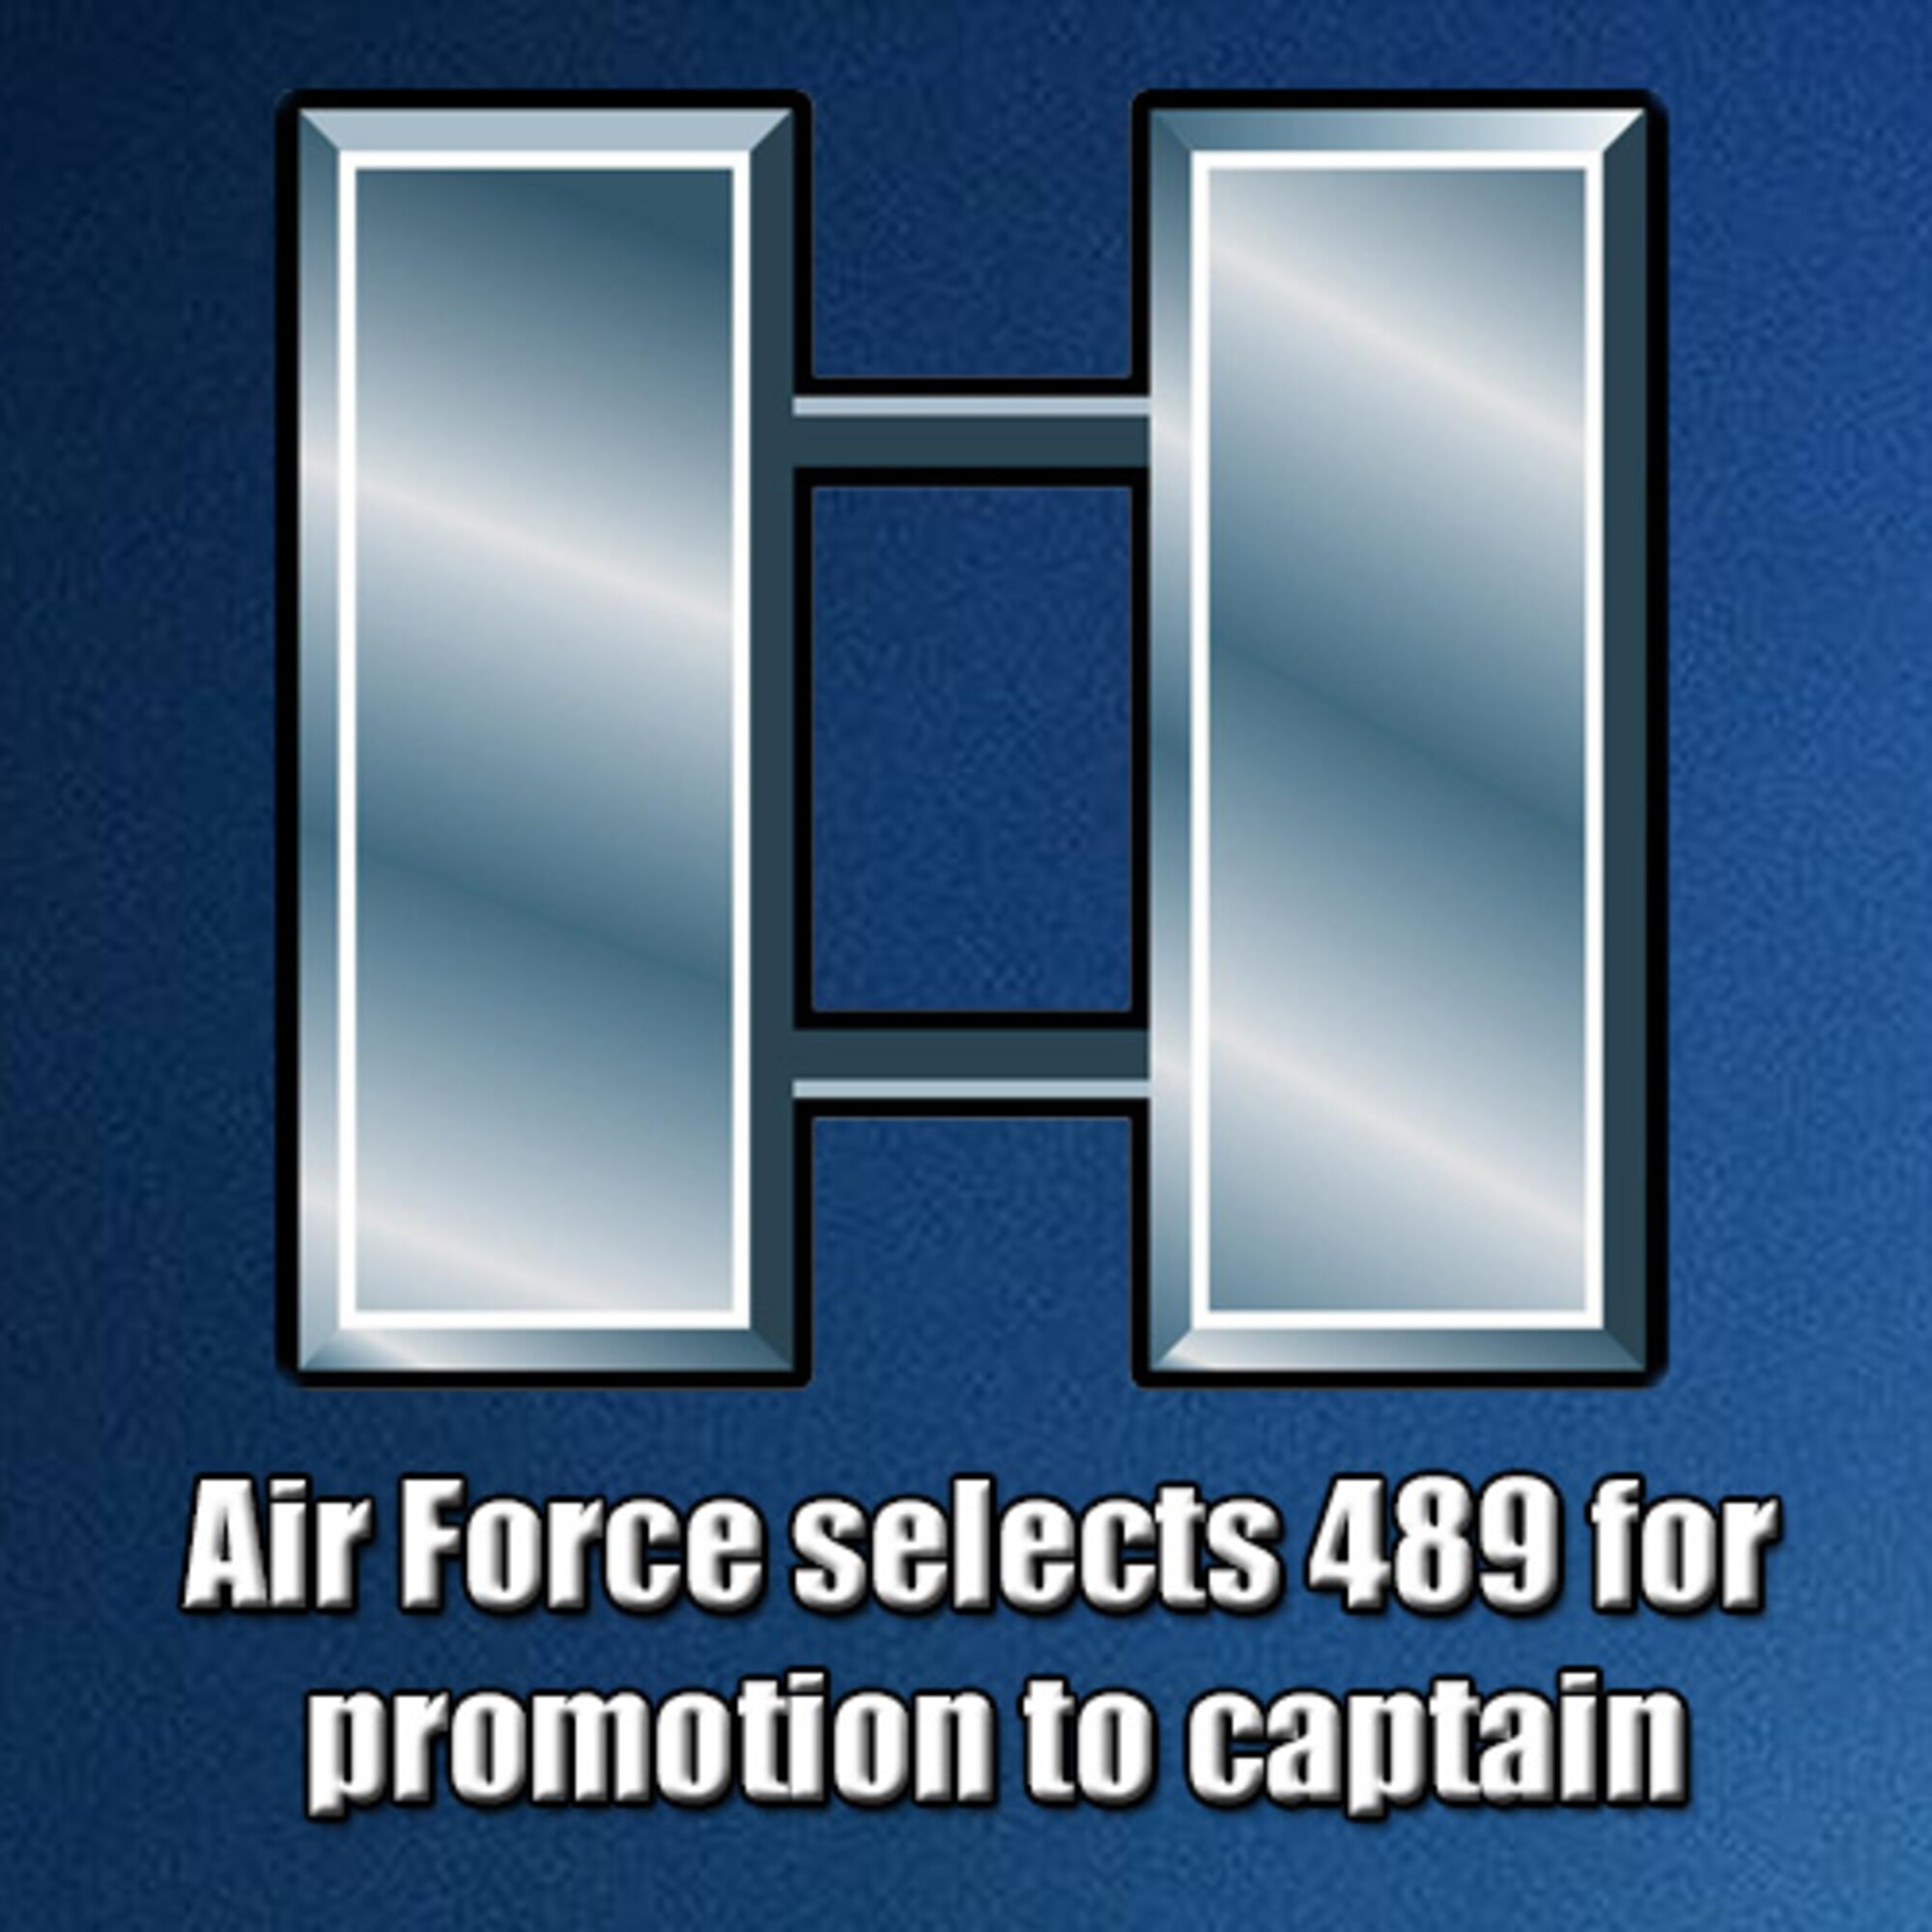 Congratulations to the 489 selected for promotion to captain! (AFPC courtesy graphic)